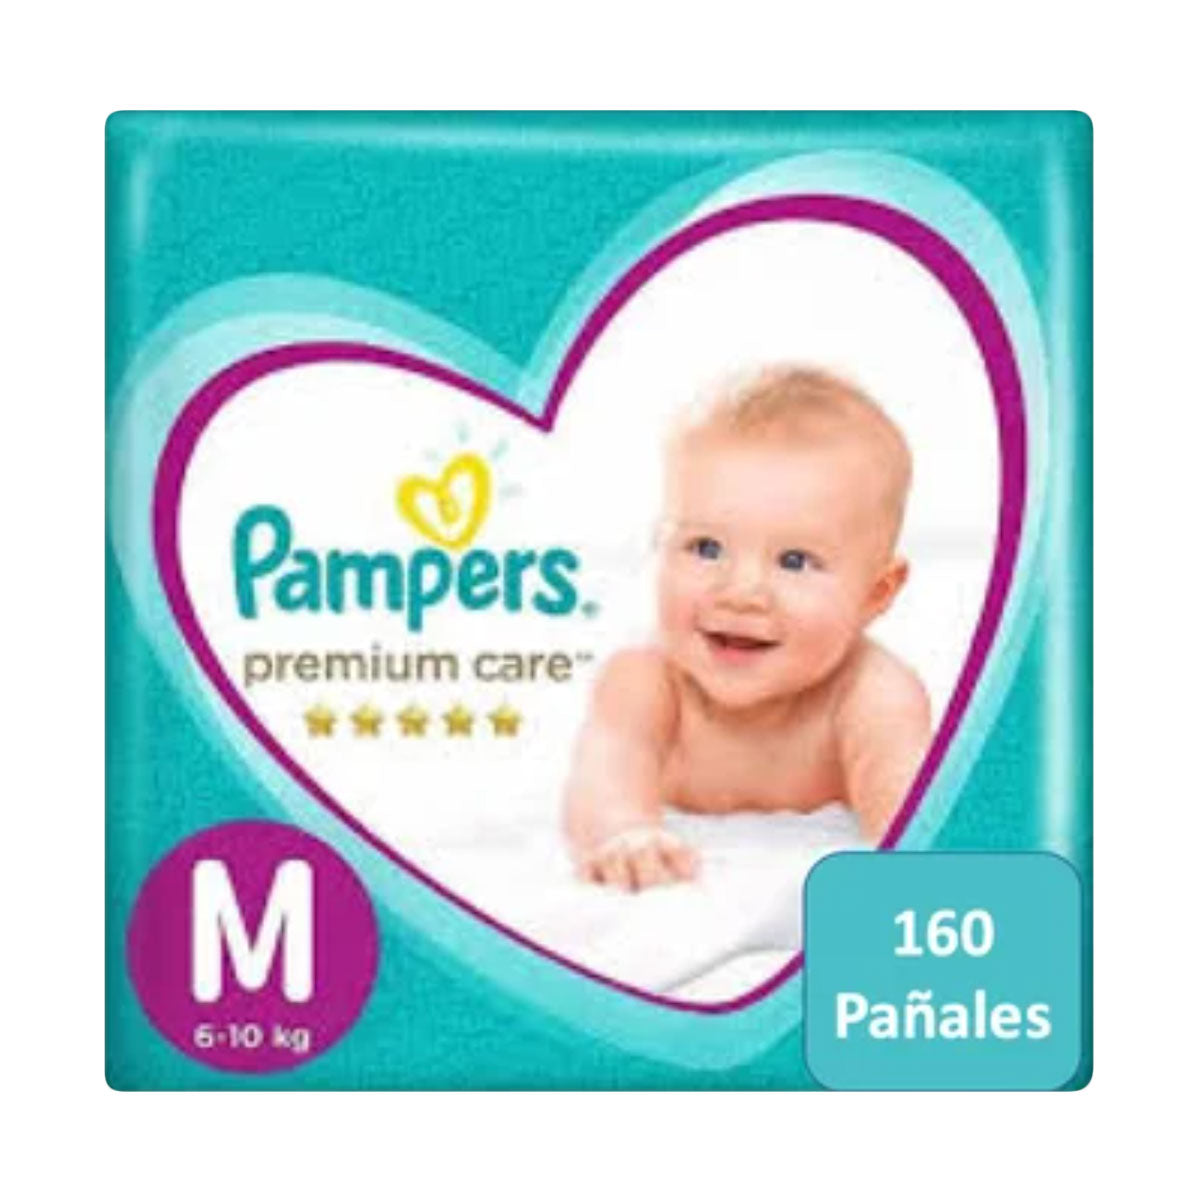 Pañales Pampers Premium Care M (160 unidades)